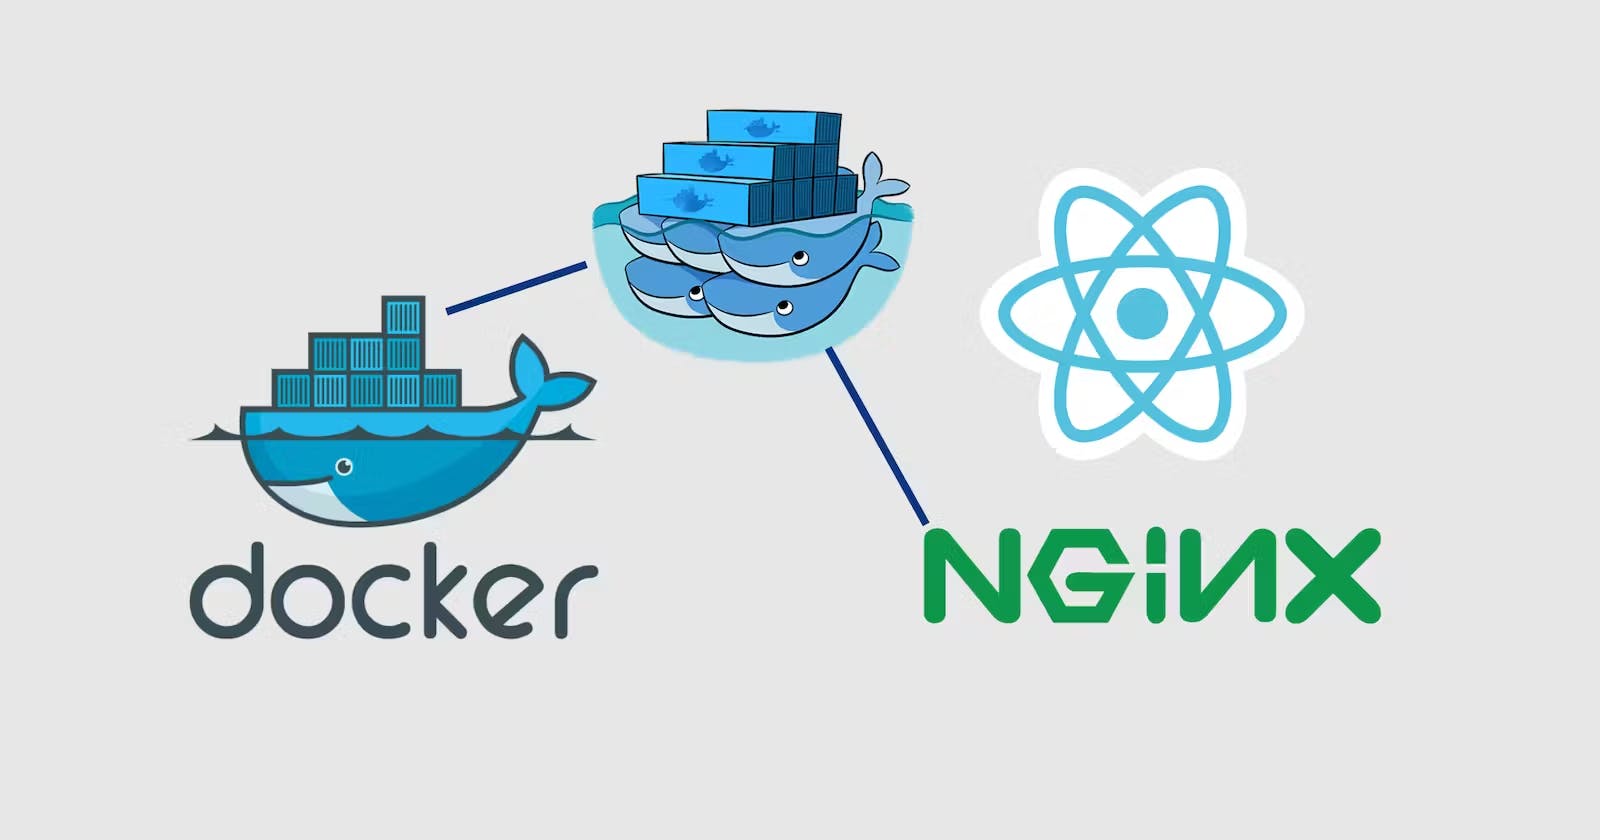 Dockerizing a React App with Nginx, using multi-stage builds